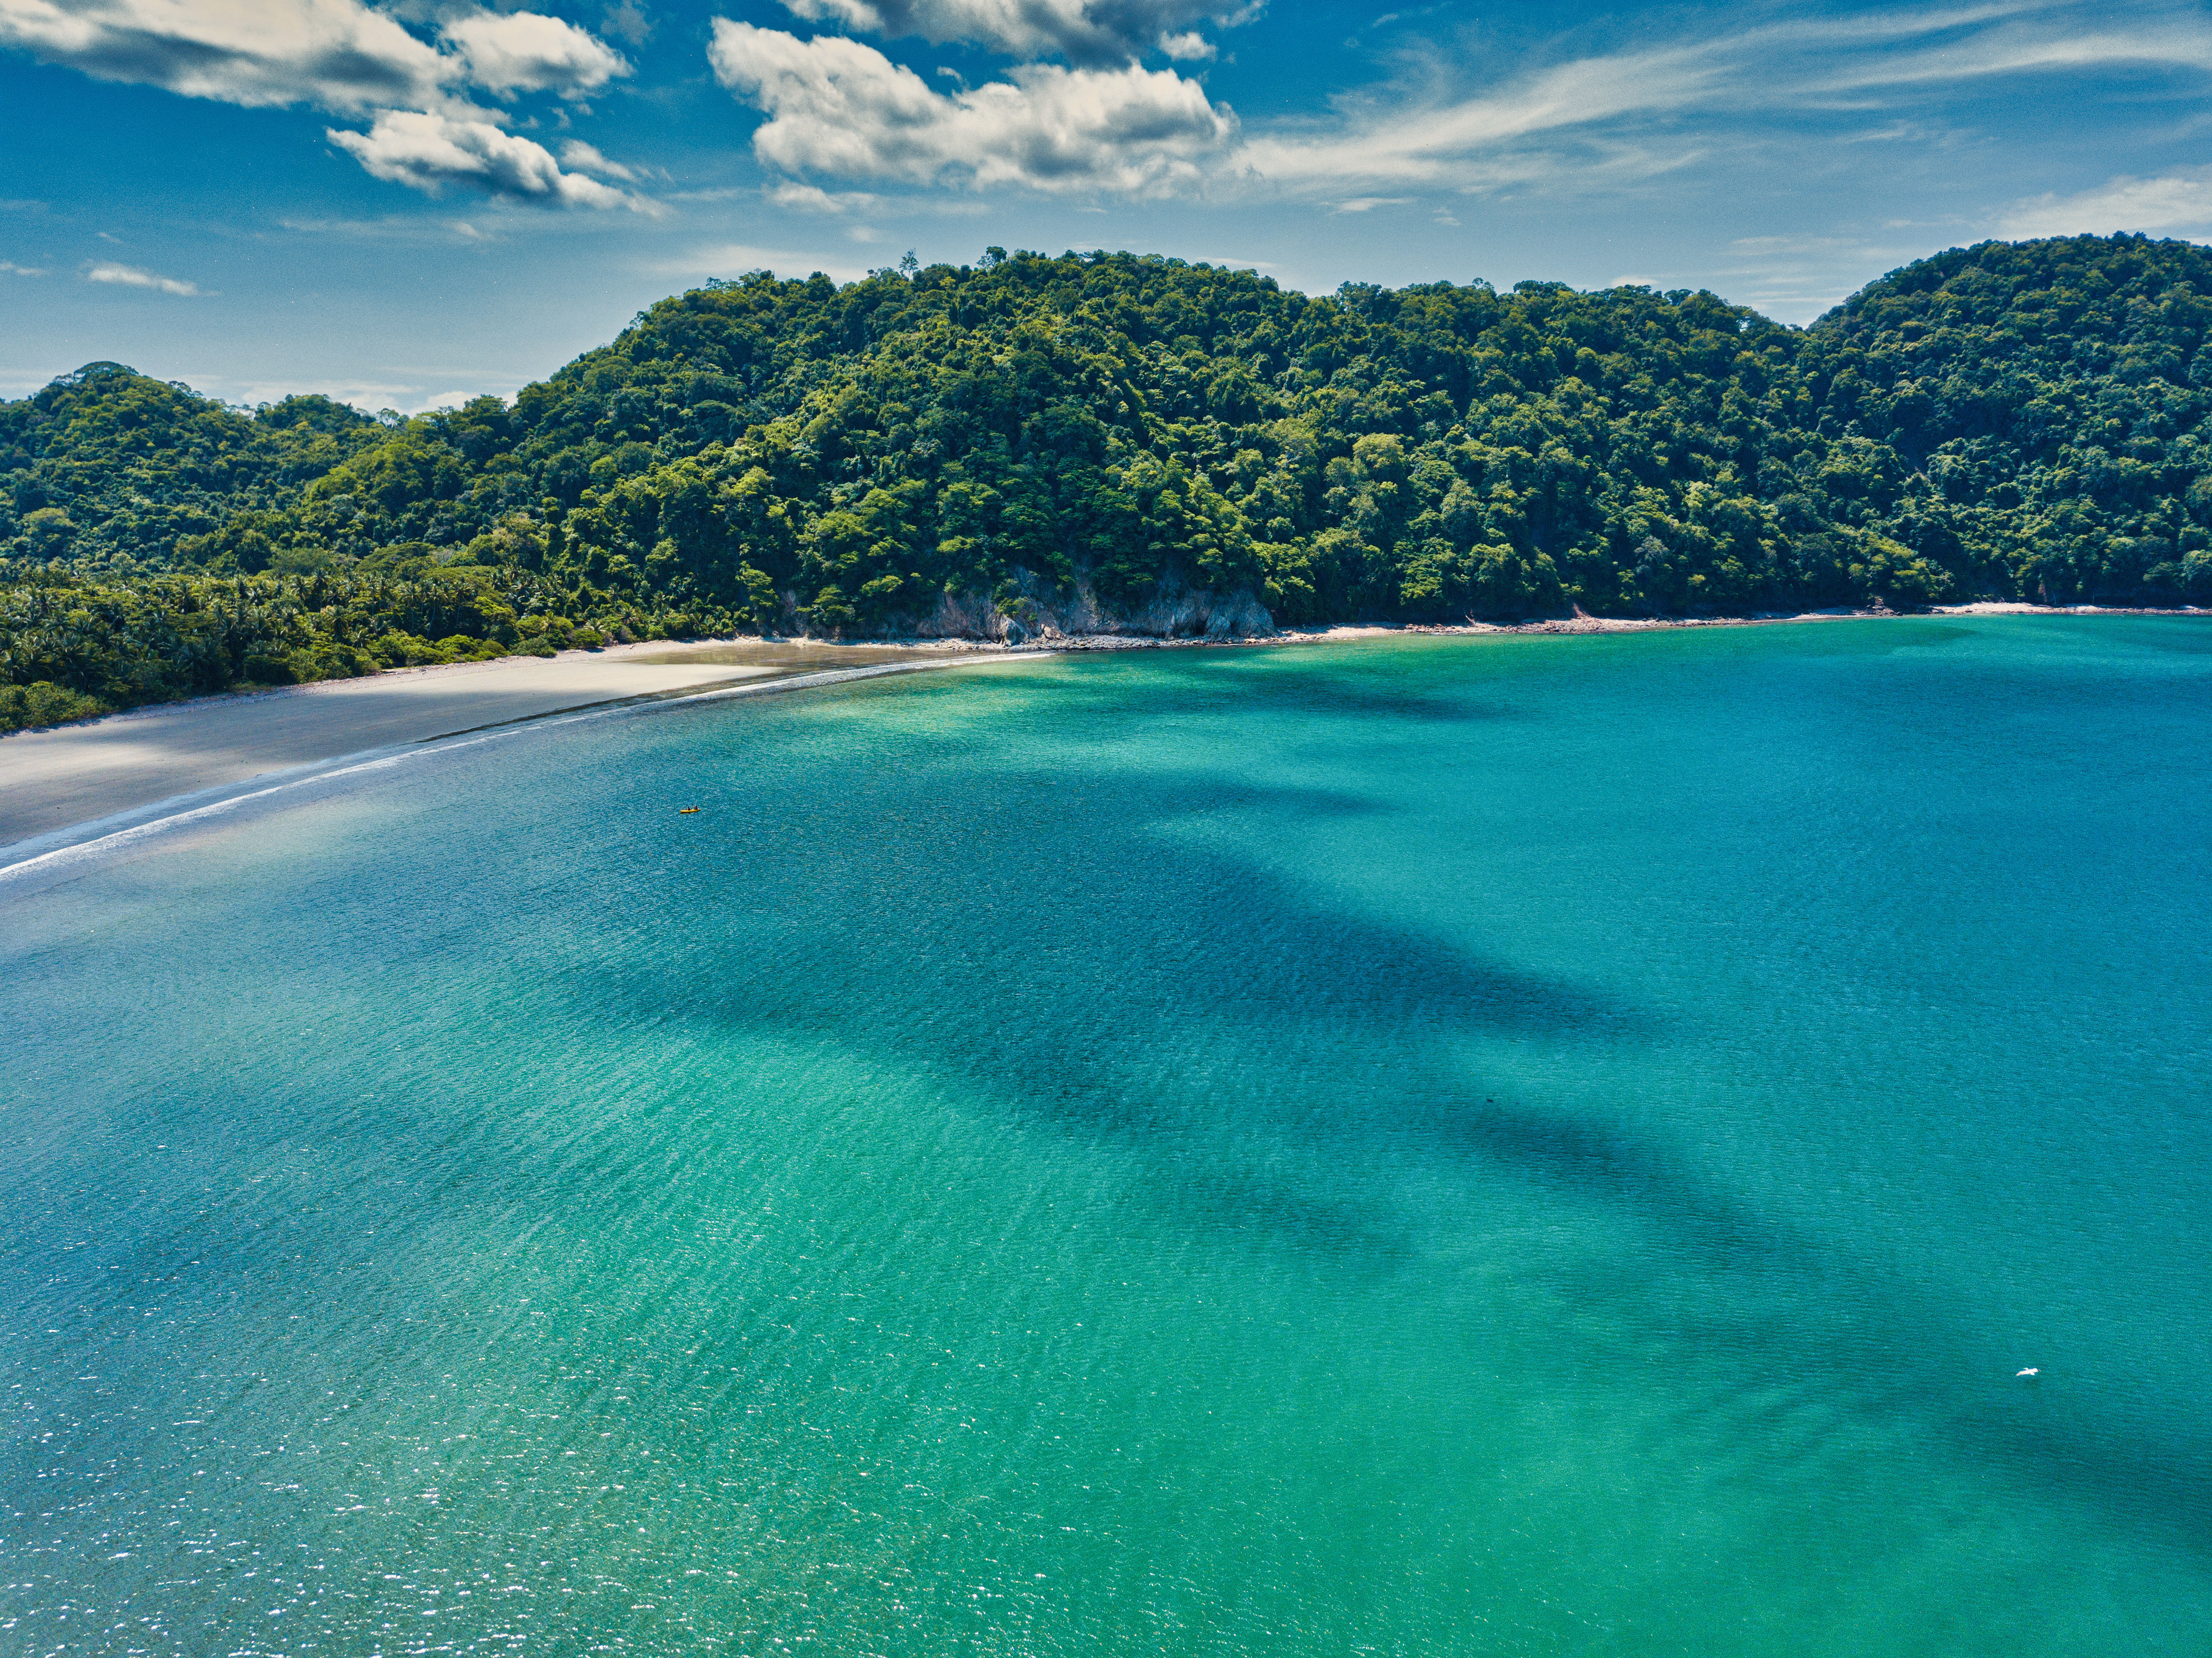 An empty, beautiful white sand beach around the Gulf of Nicoya in Costa Rica with lush green hills and turquoise waters.